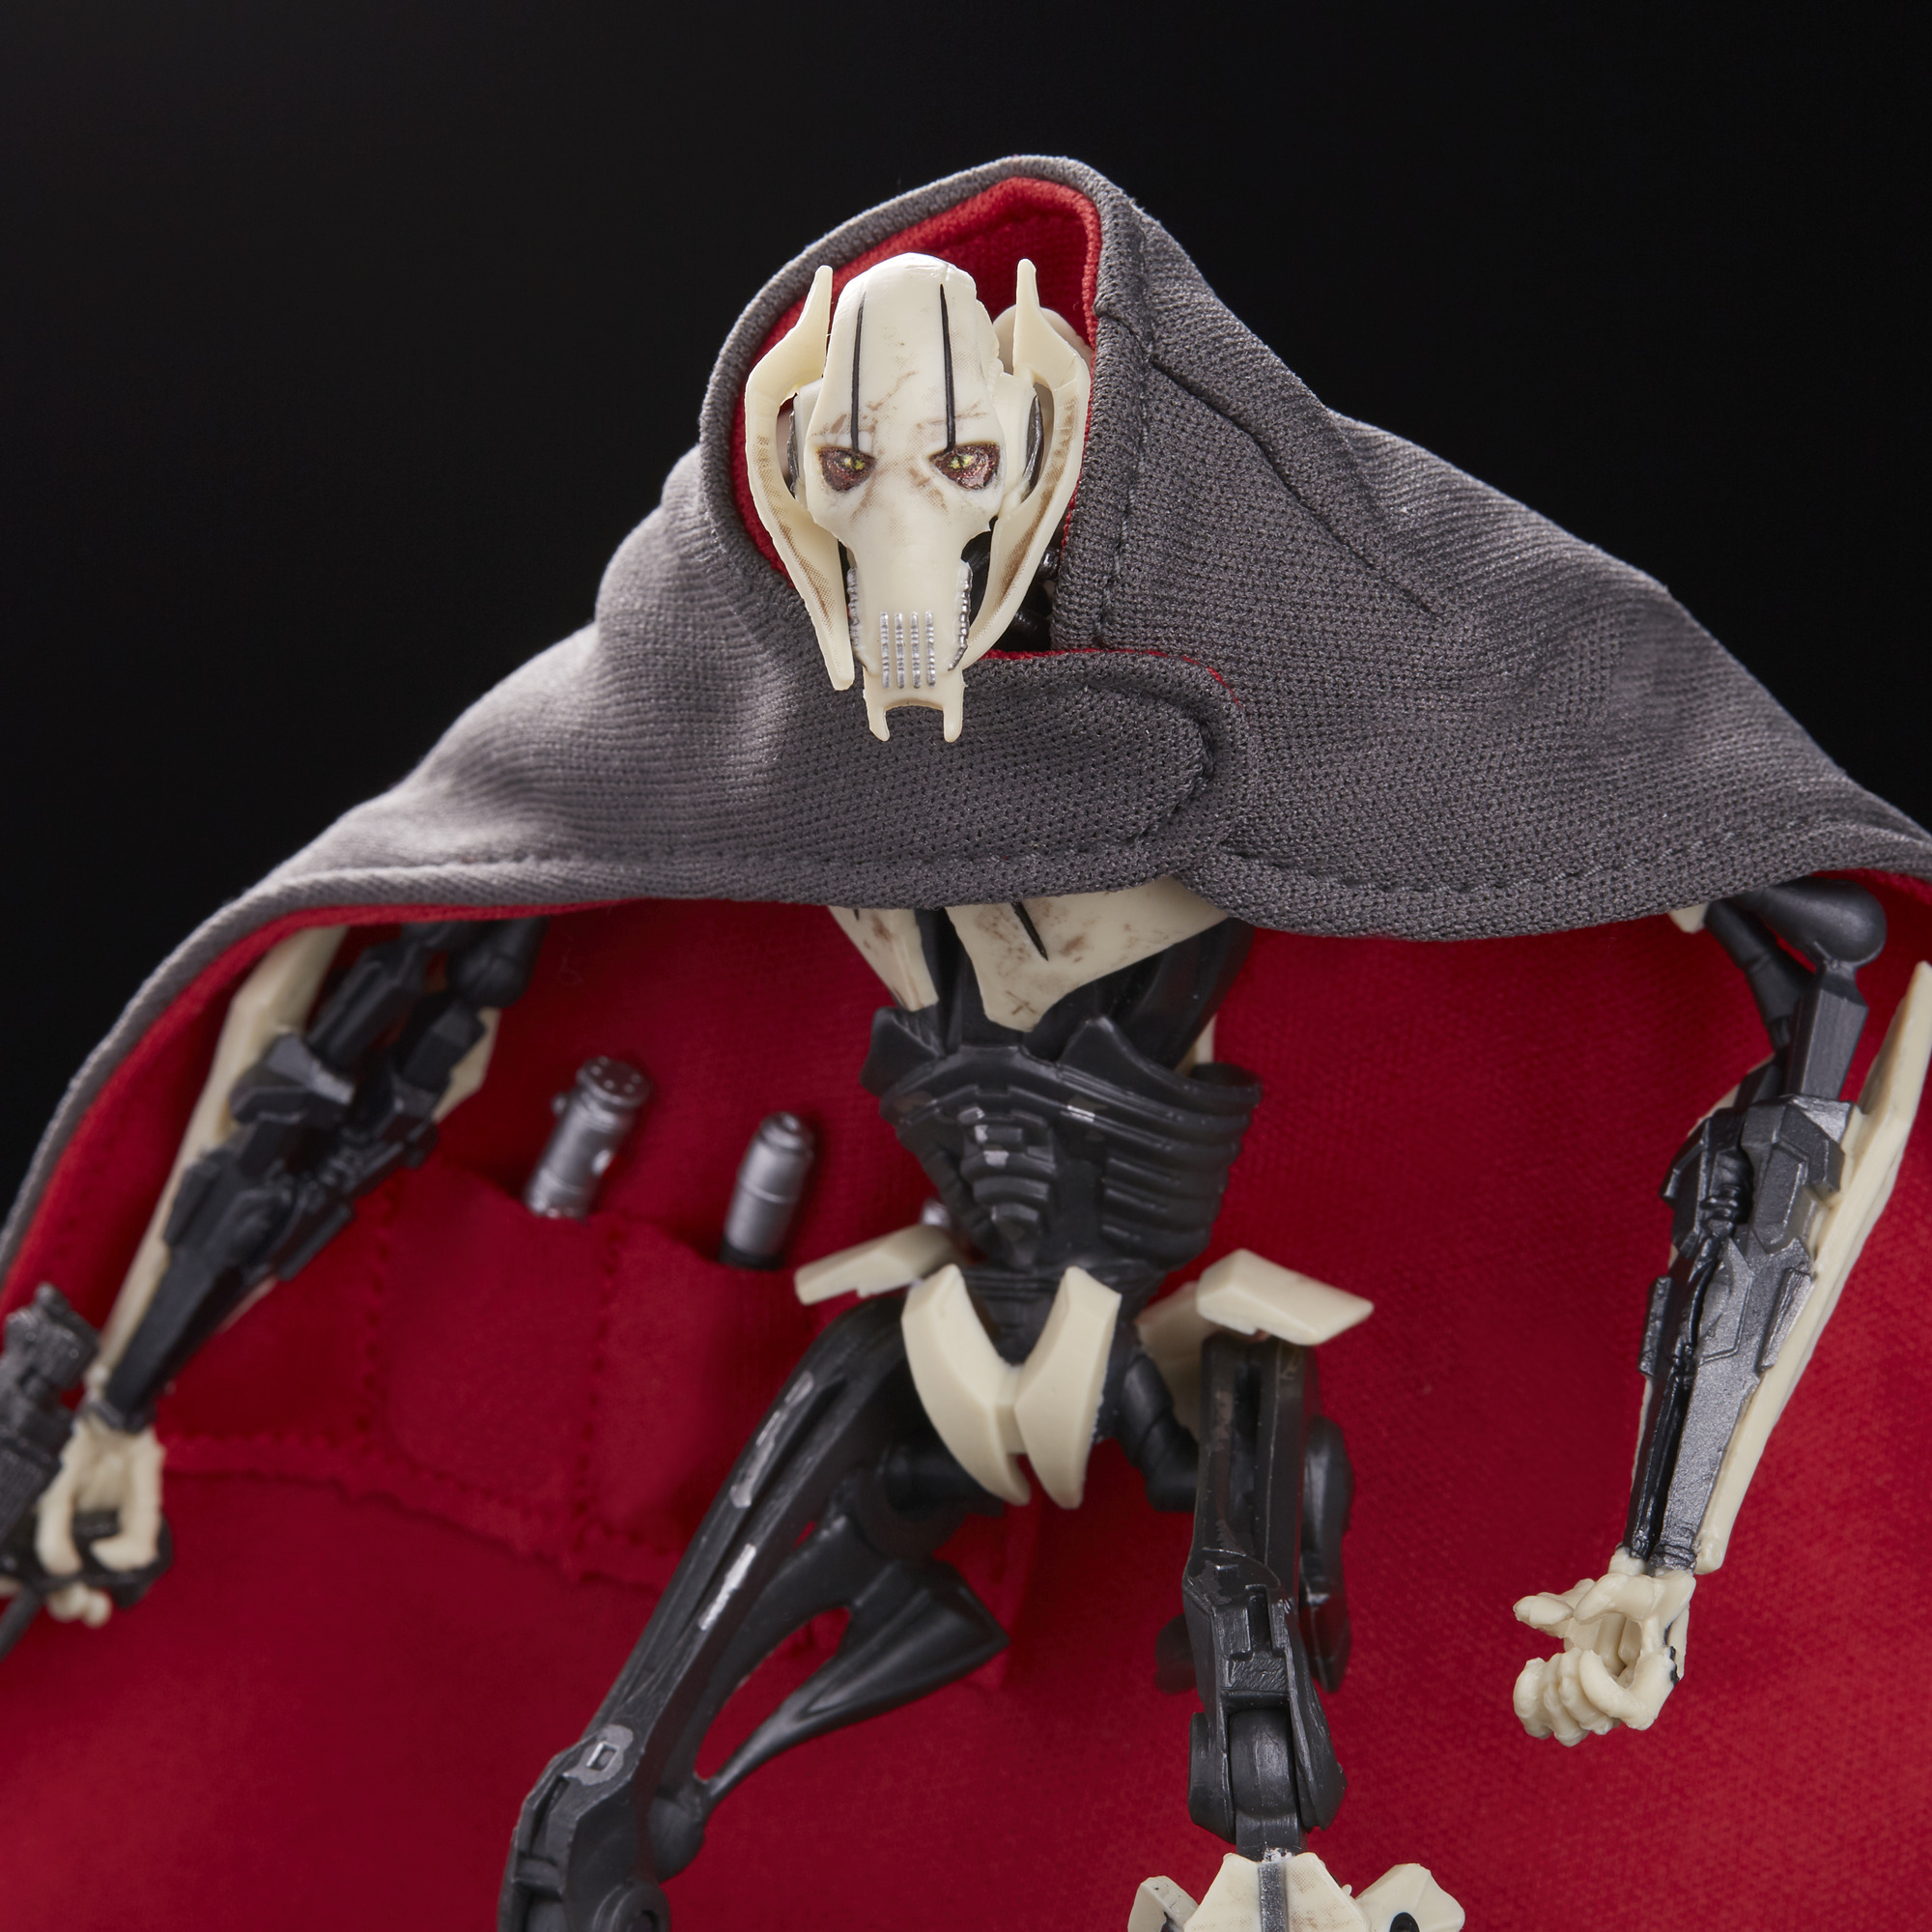 Star Wars: The Black Series General Grievous Kids Toy Action Figure for Boys and Girls (9”) - image 3 of 8